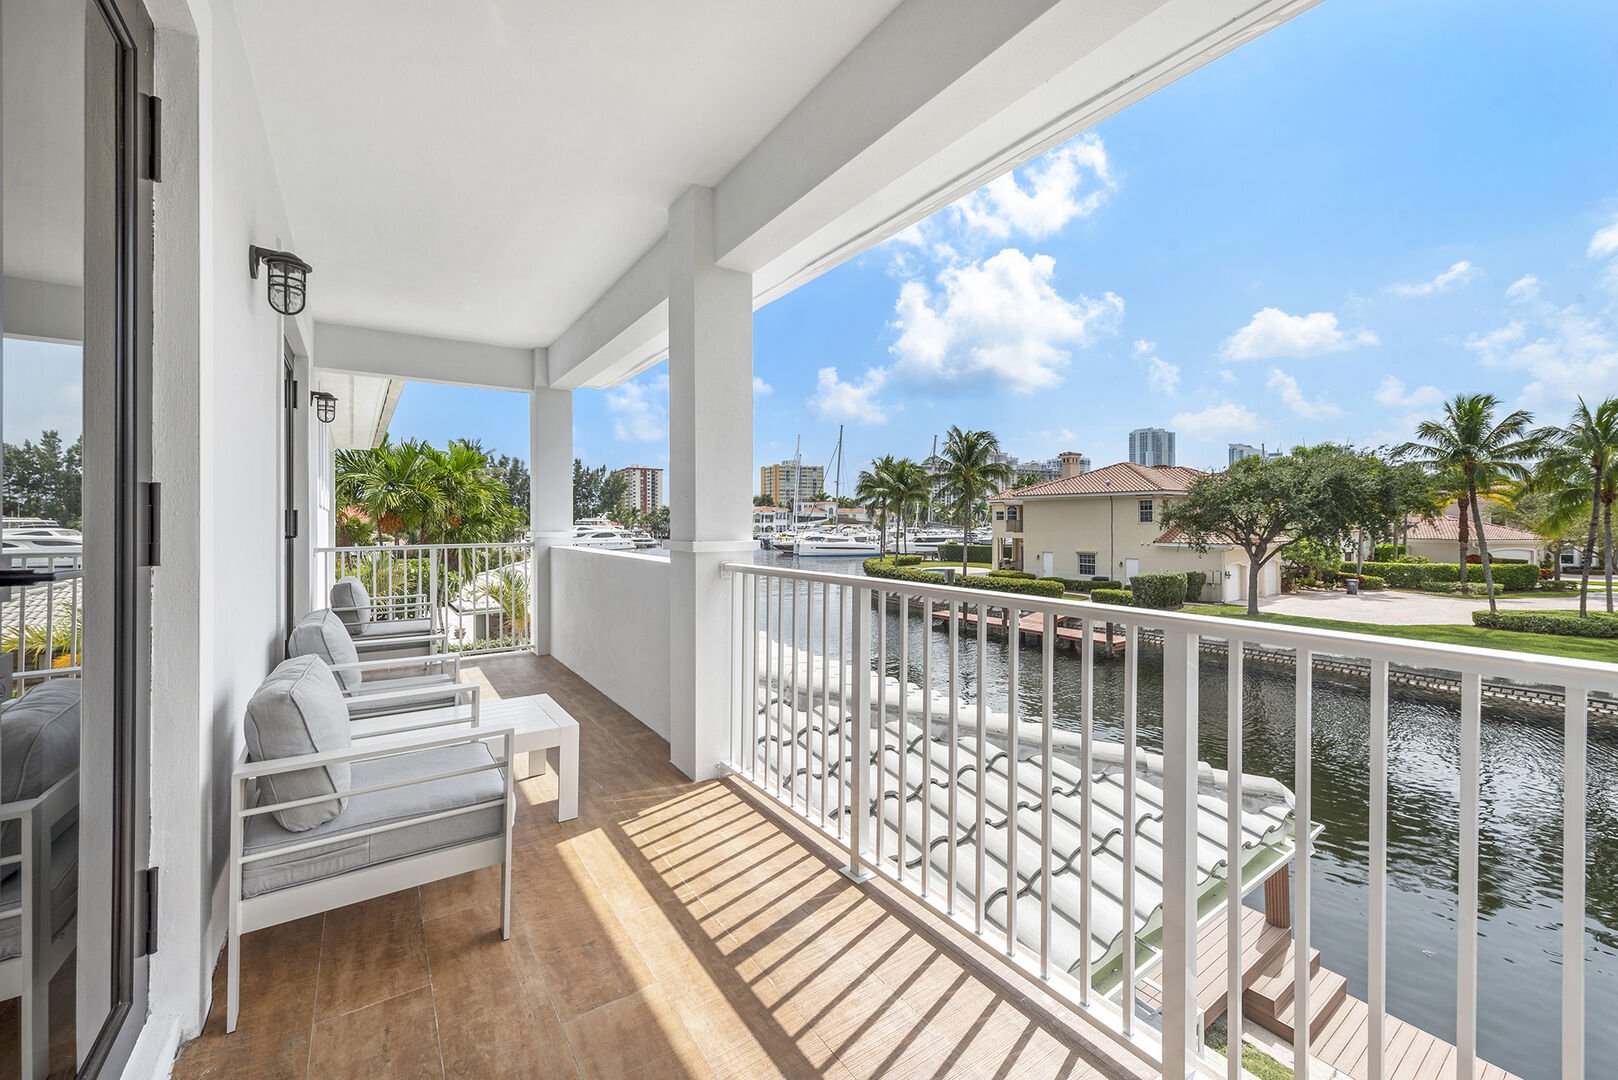 The balcony off the primary bedroom showcases canal views just off the Intracoastal waterway.